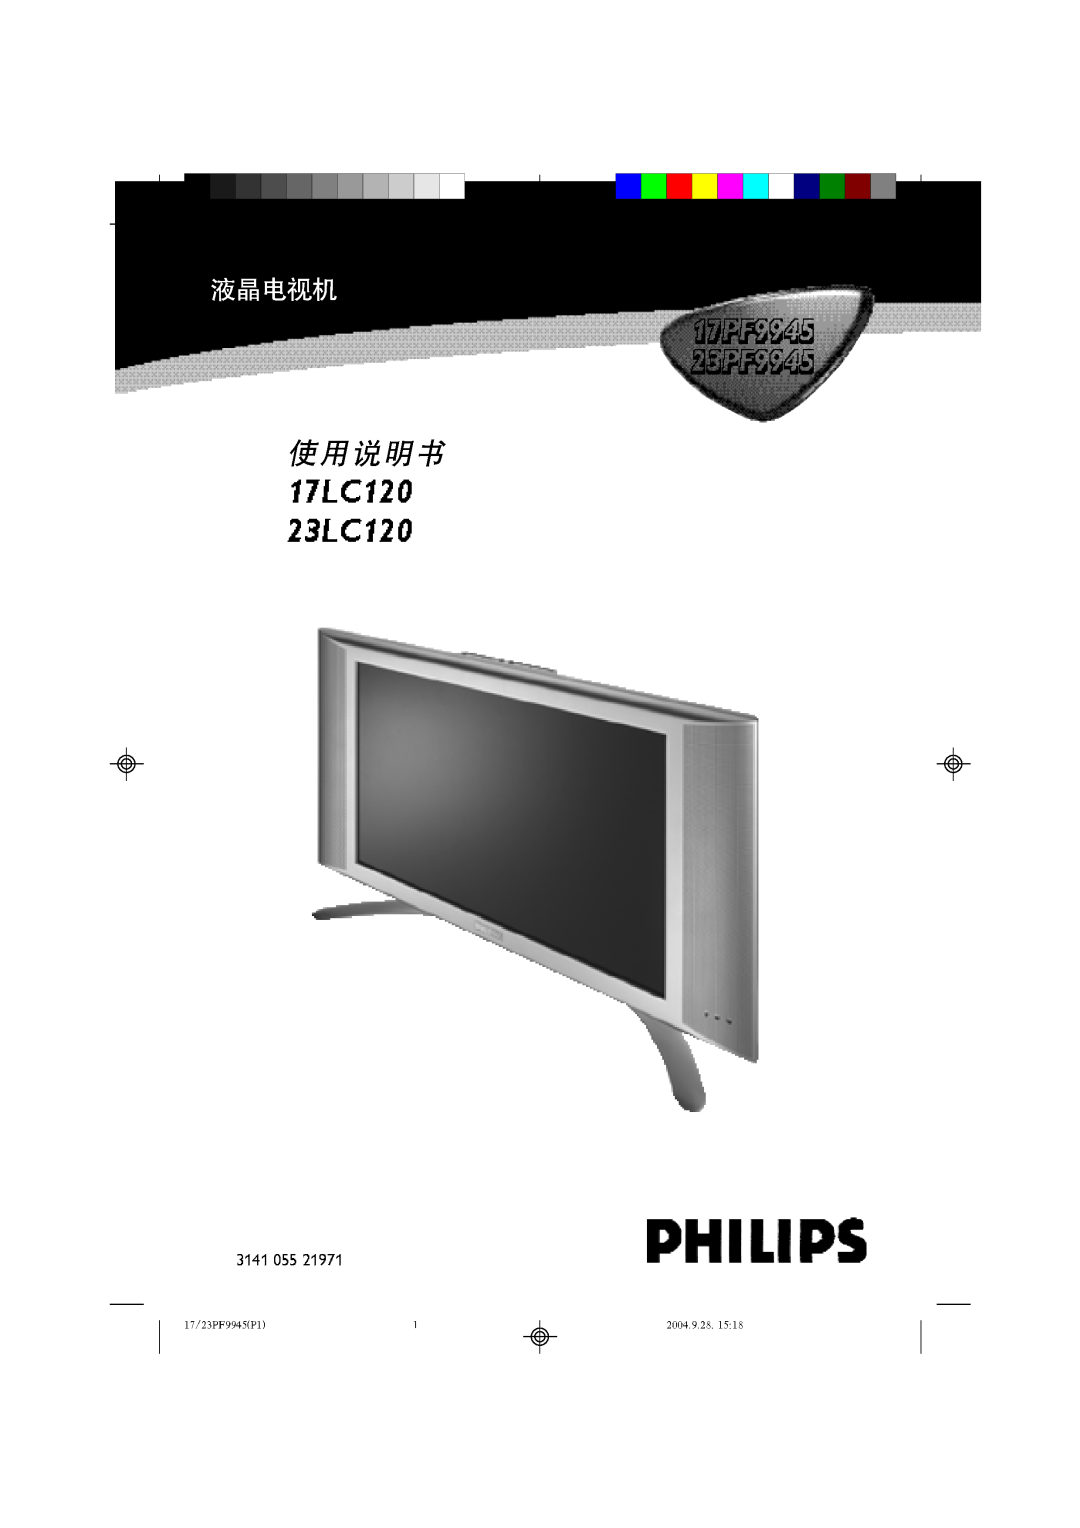 Philips 17LC120, 23LC120 manual 